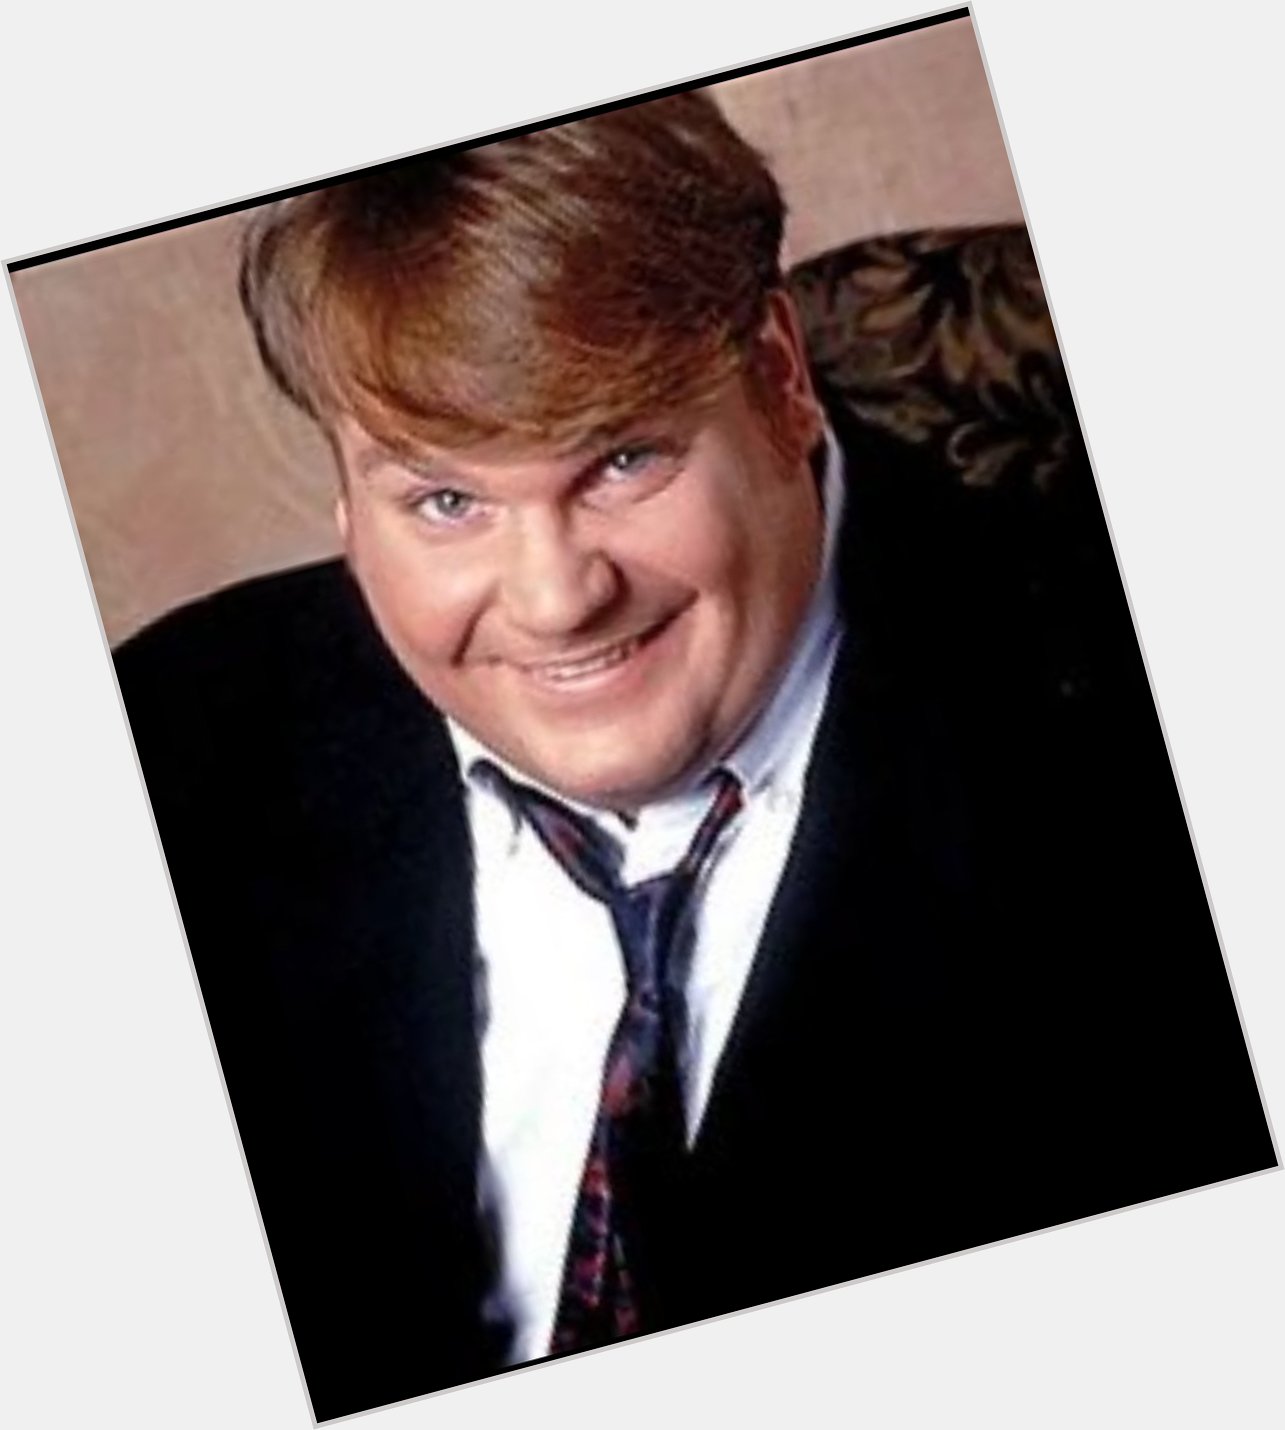 Happy Birthday, Chris Farley! Every time I see a van down by the river I think of you. RIP 